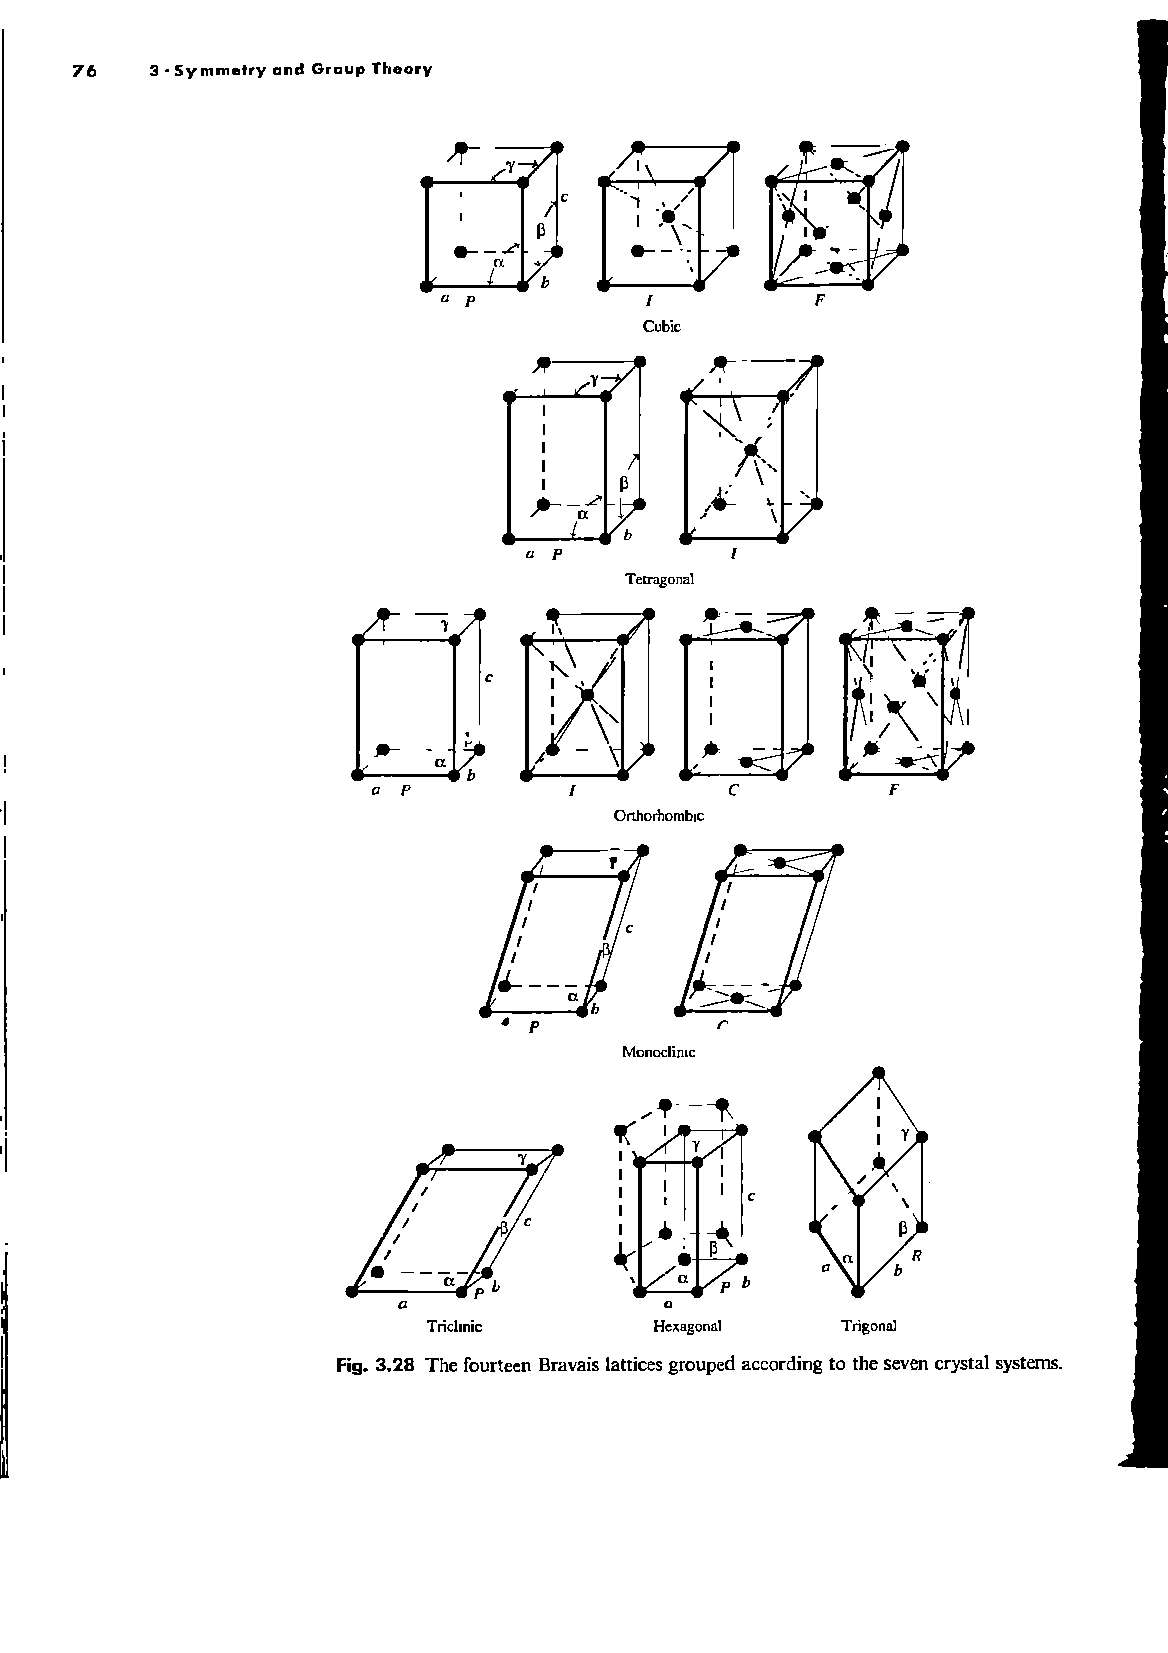 Fig. 3.28 The fourteen Bravais lattices grouped according to the seven crystal systems.